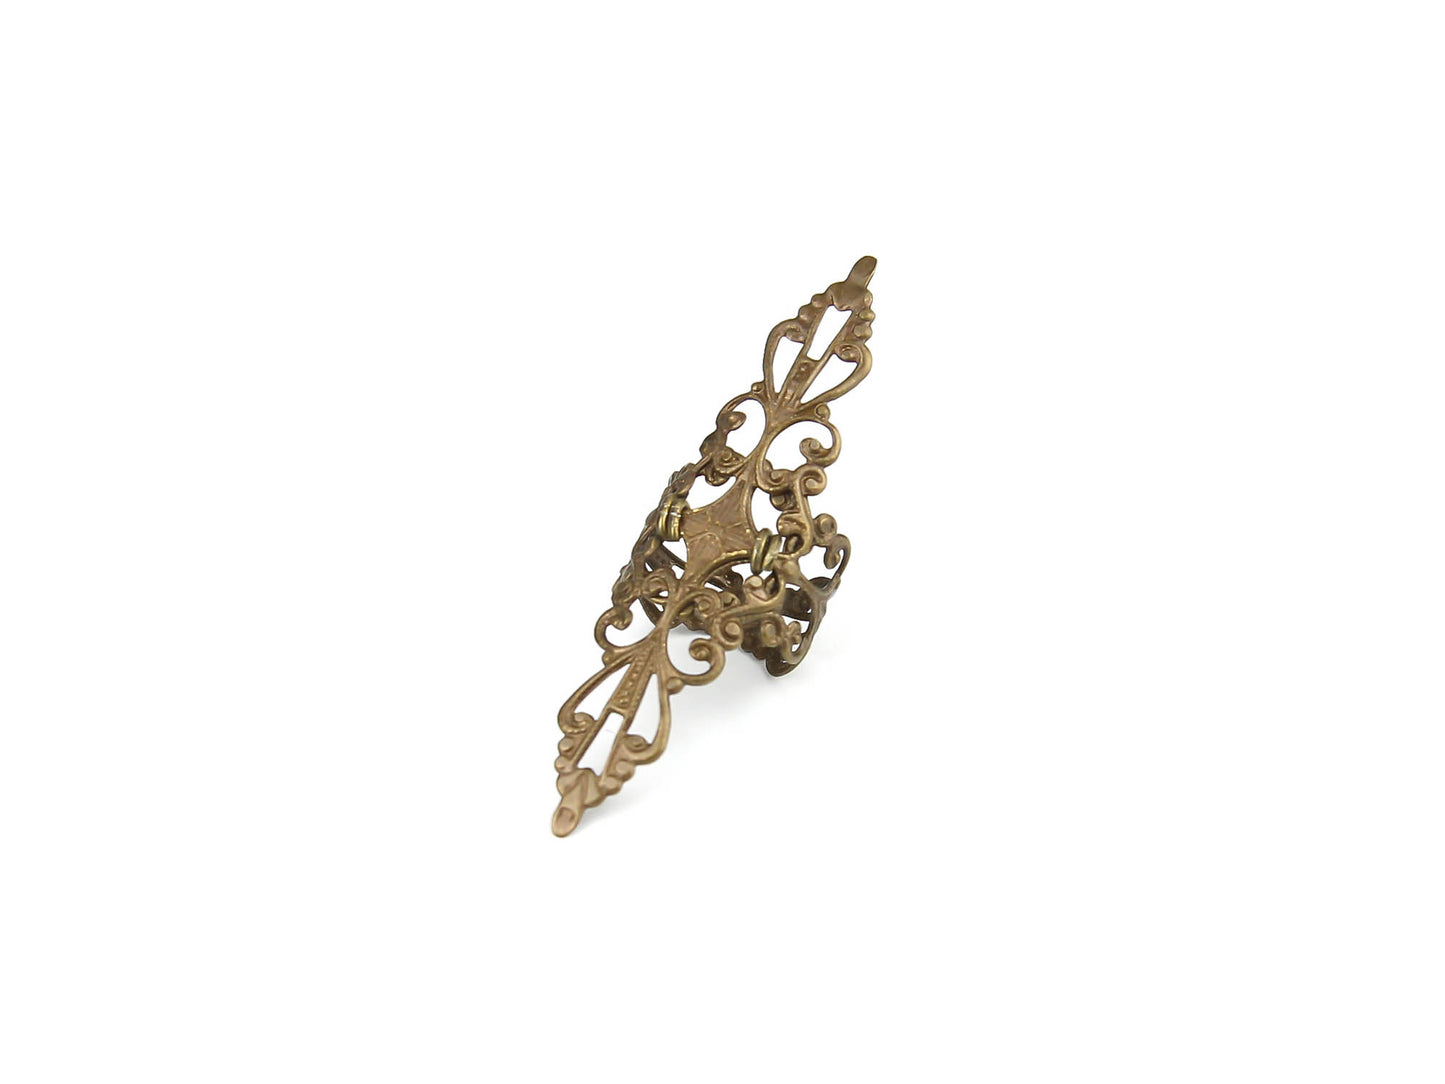 Gothic-styled bronze filigree armor ring with intricate design for those seeking a bold and avant-garde jewelry statement.